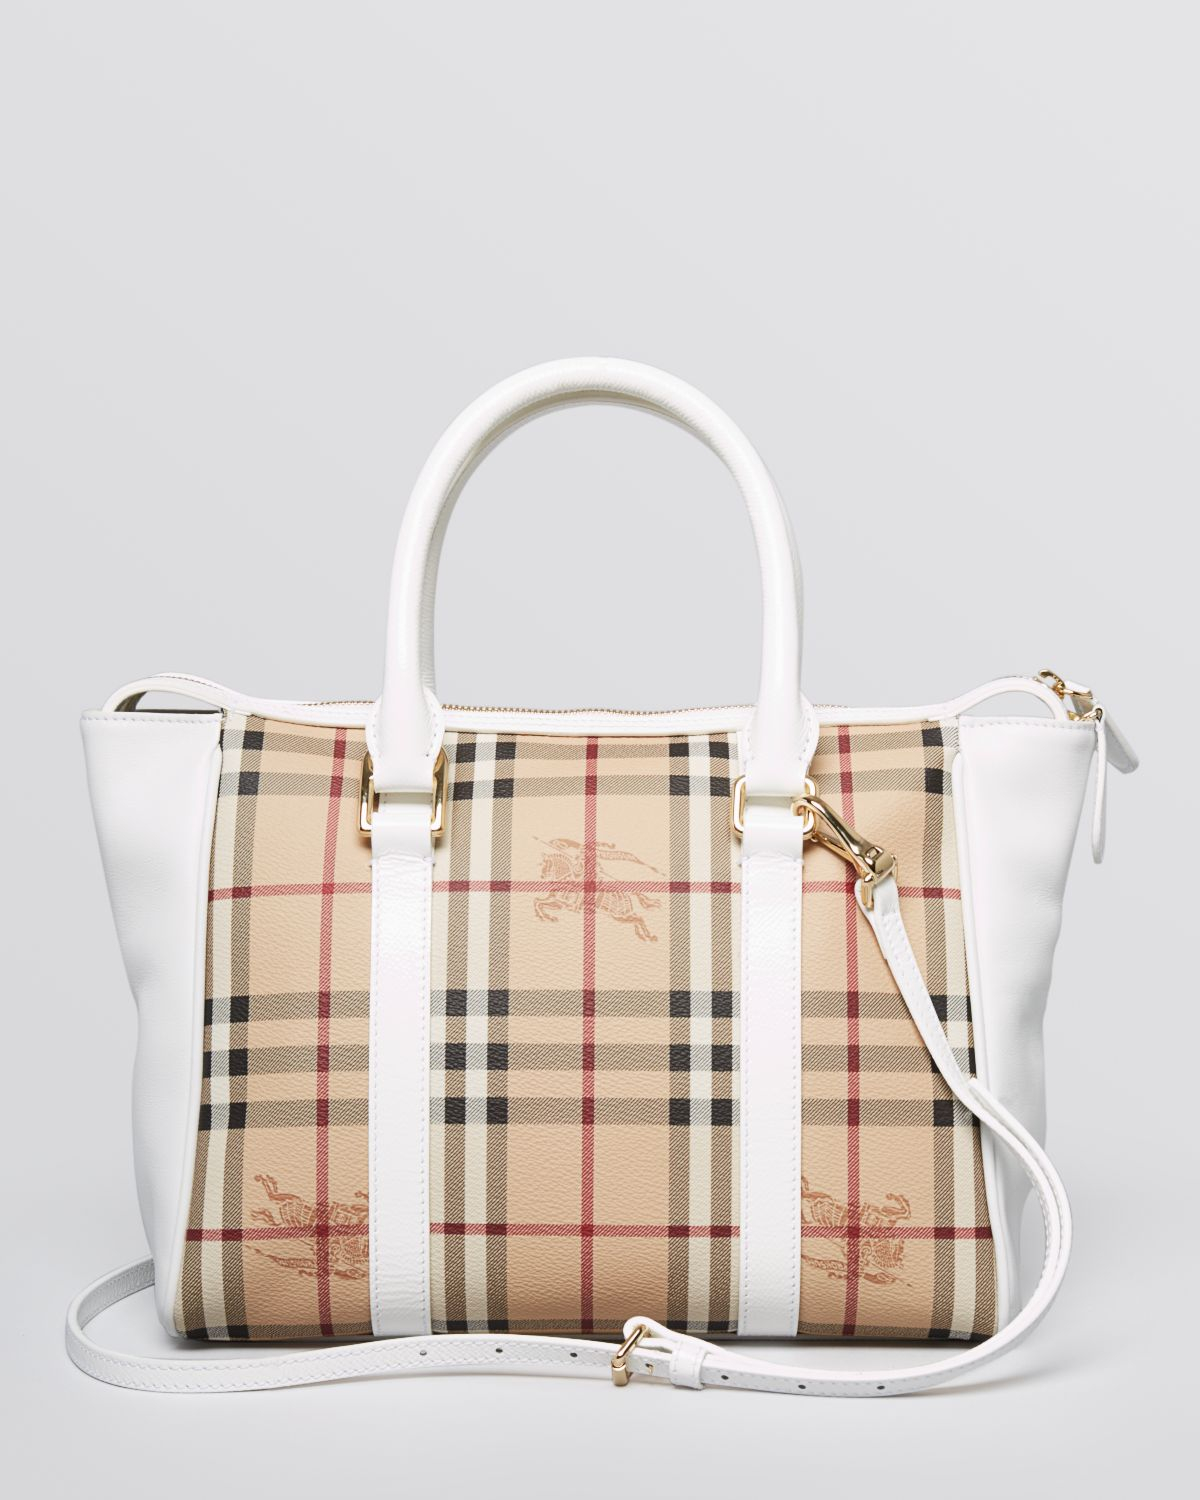 Lyst - Burberry Tote Haymarket Colours Medium Chatton in Brown